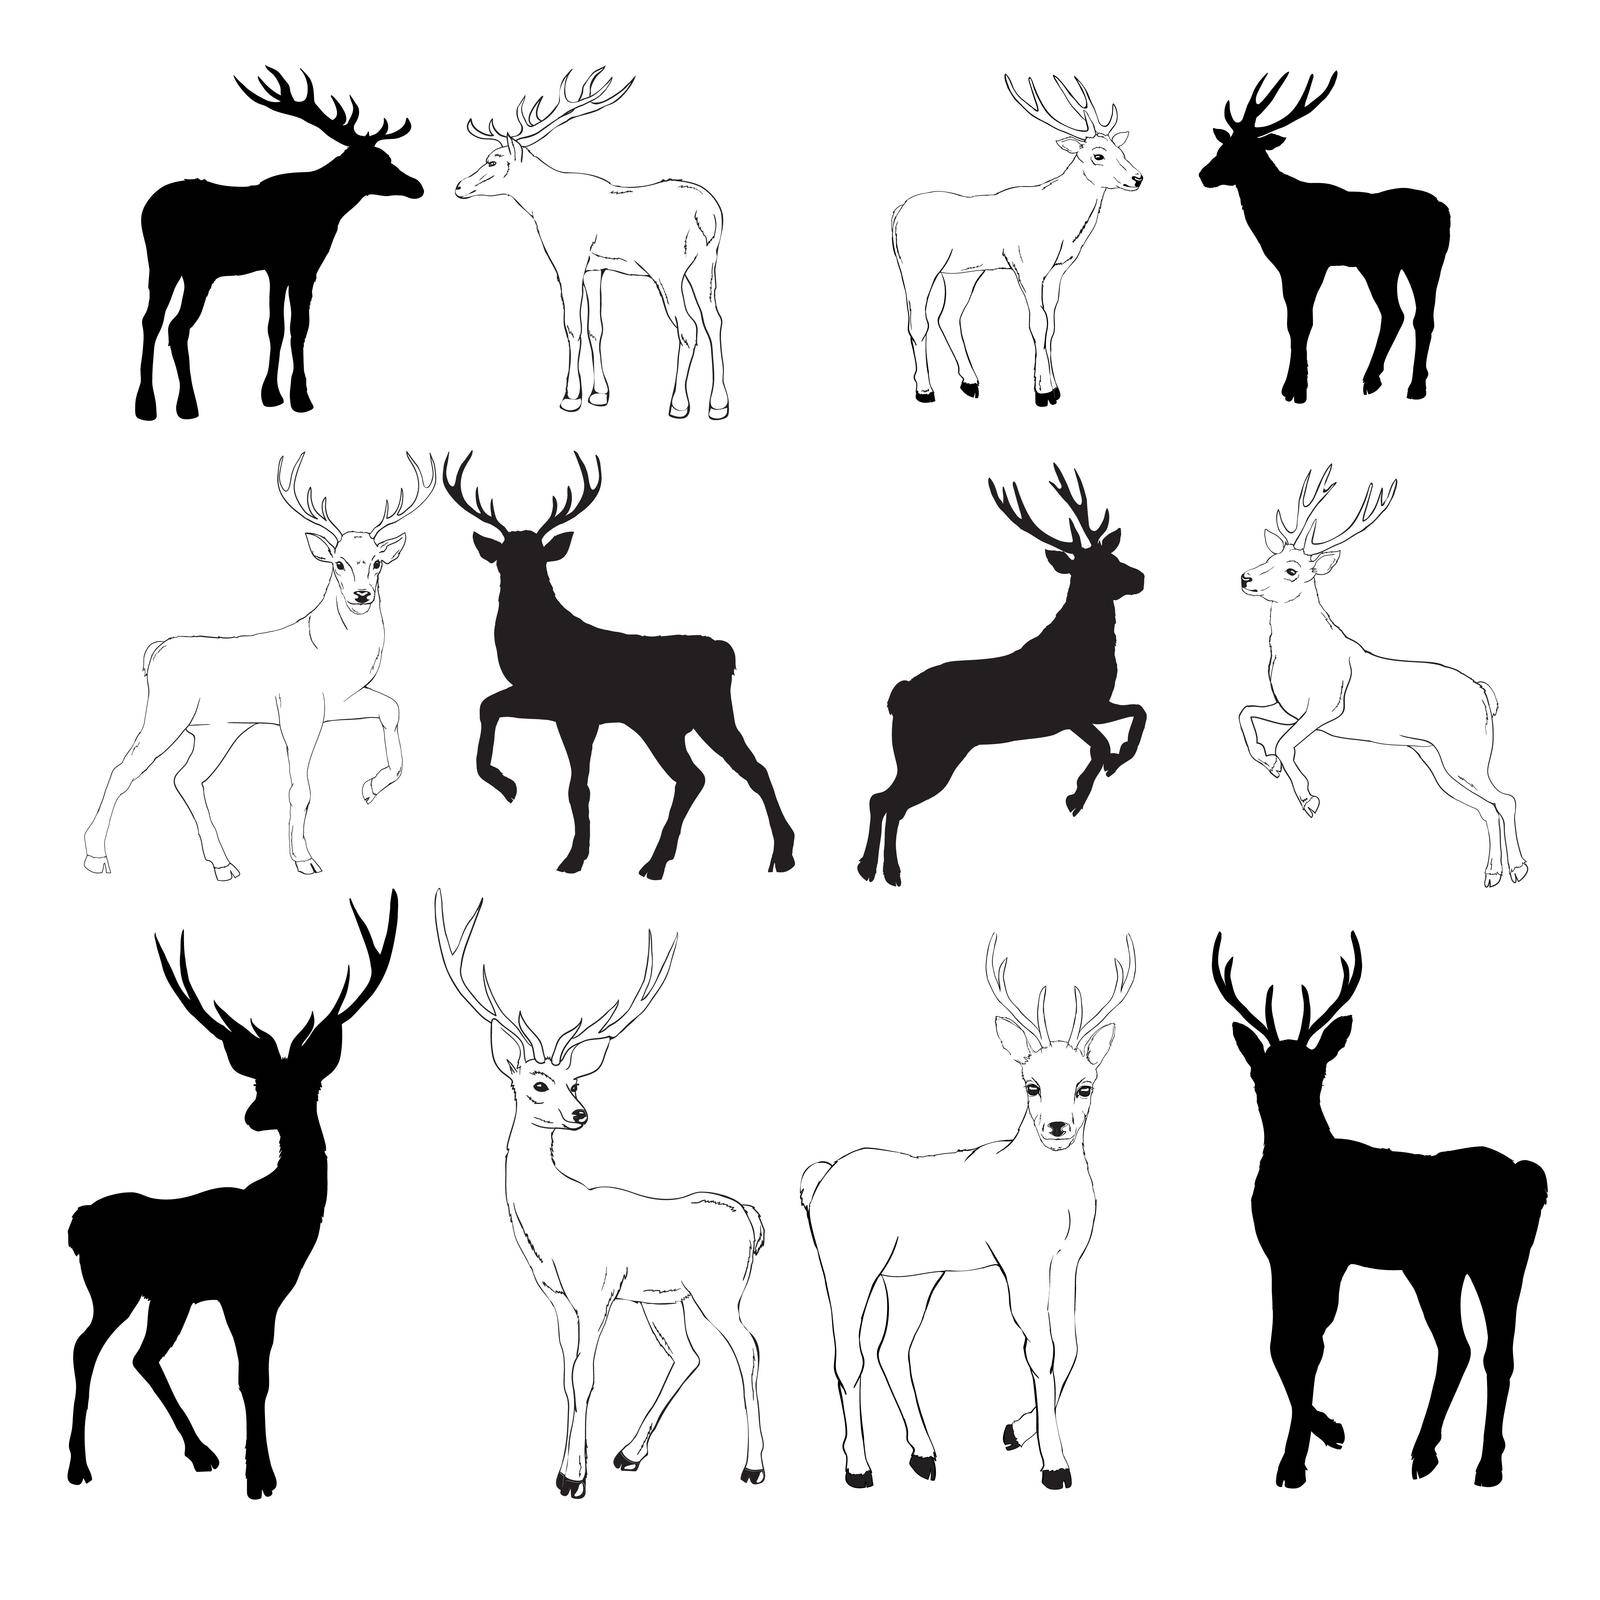 deer silhouette and sketch, vector, illustration, animals, set on white background, animals image